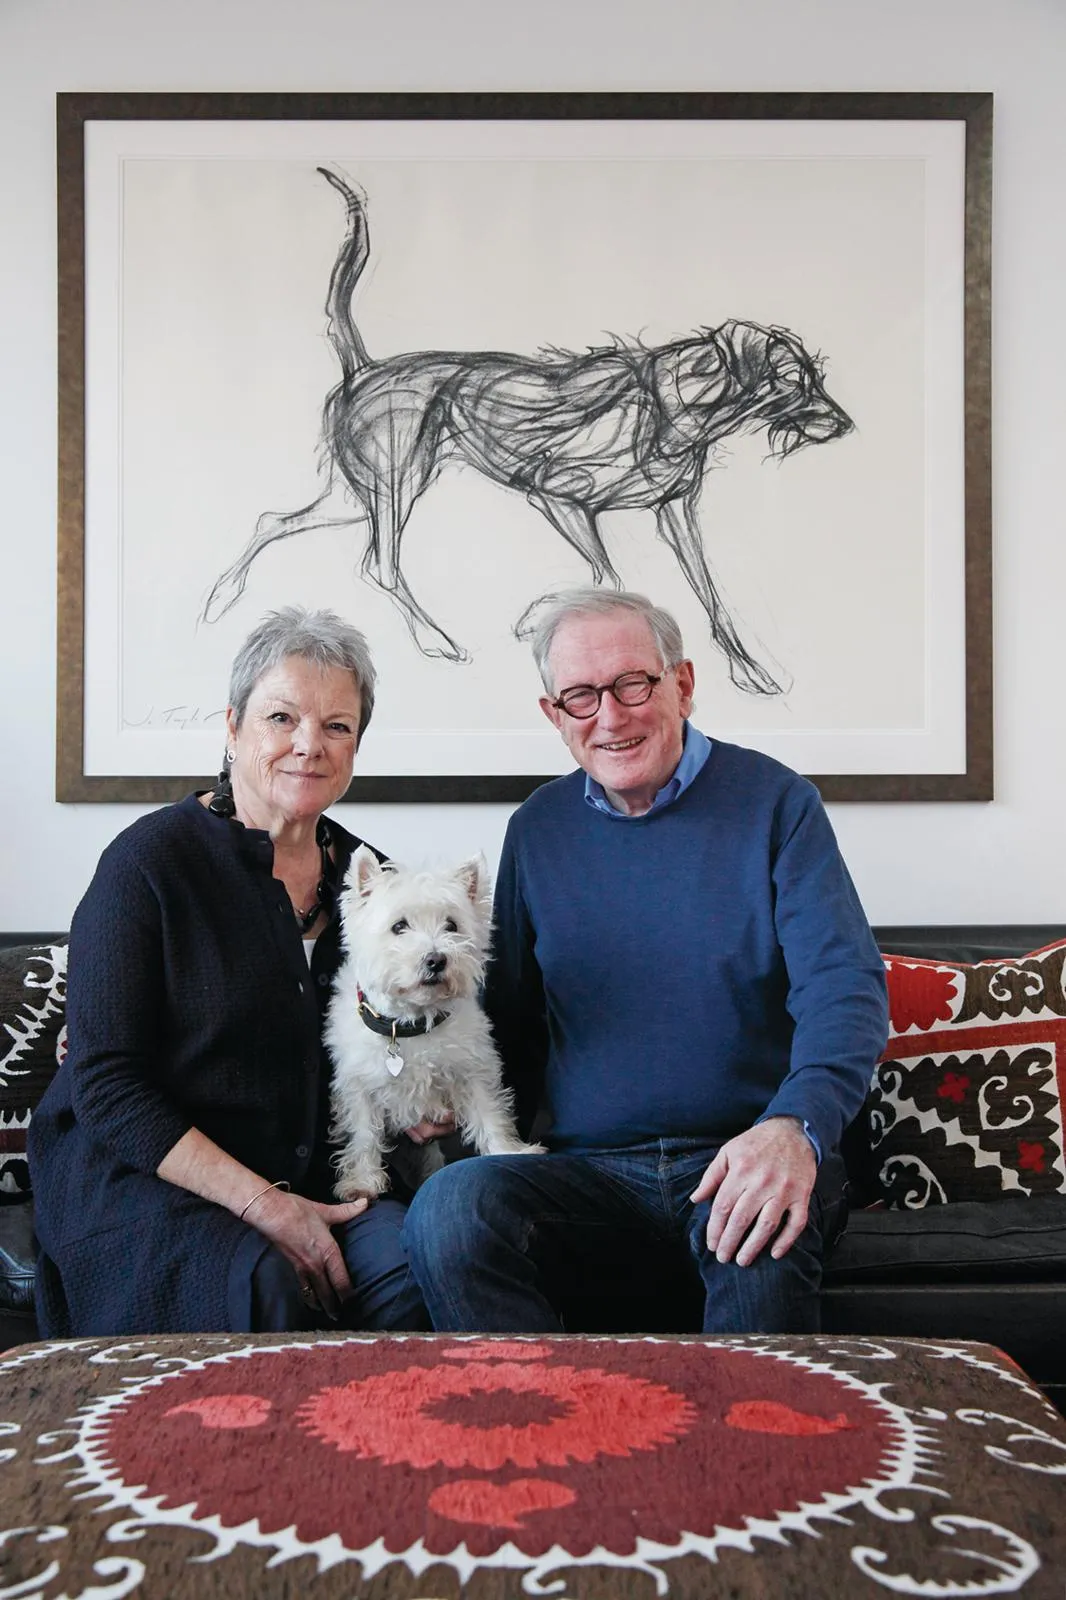 South London townhouse, owners Michael and Rosy.